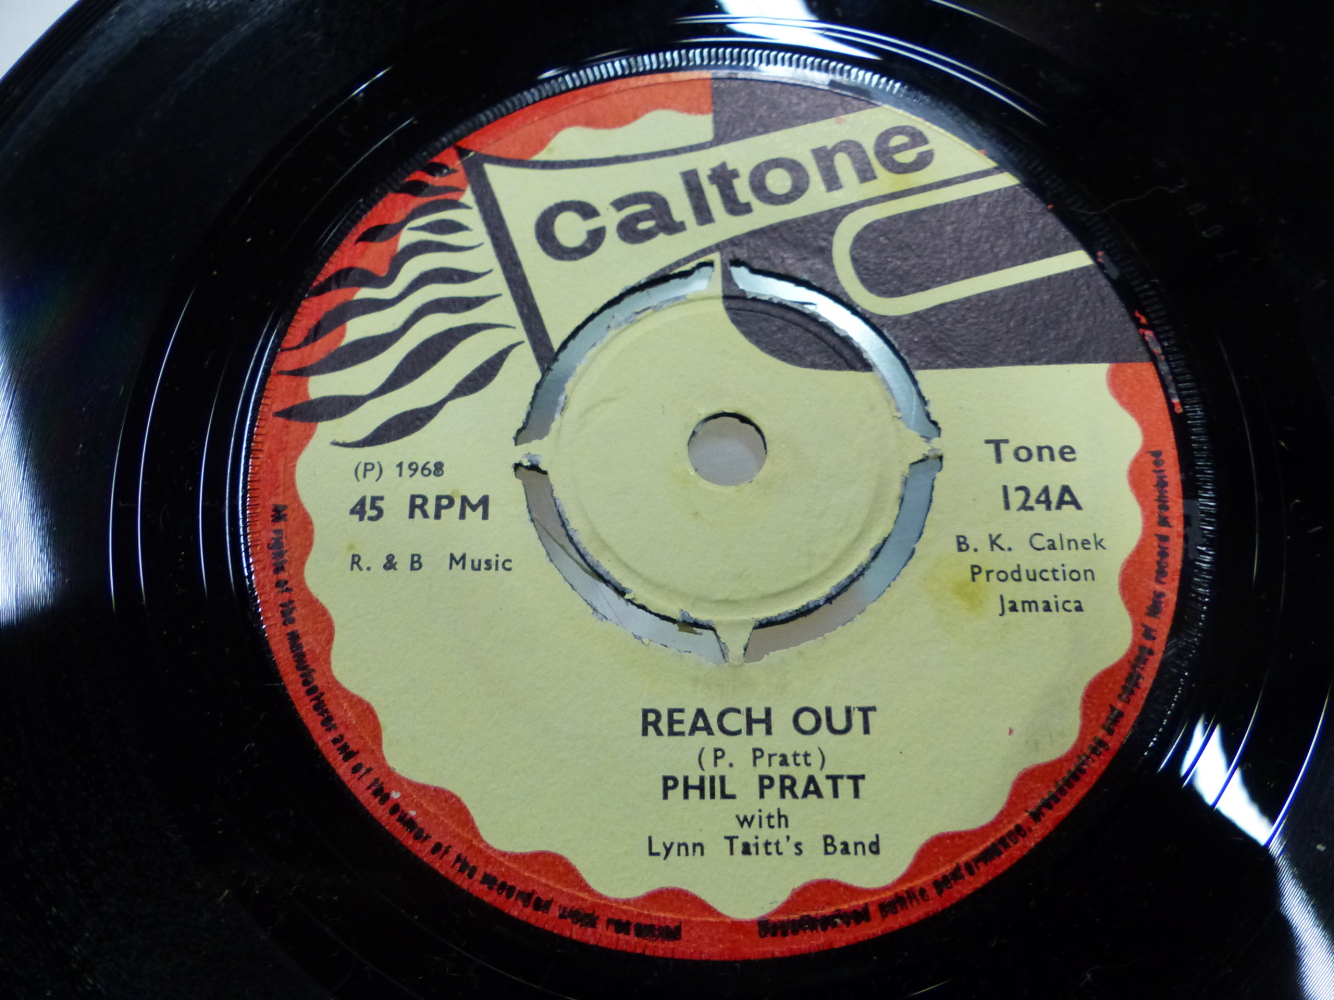 RECORDS. A CALTONE 7" SINGLE, CAT. No. TONE 124, REACH OUT BY PHIL PRATT AND DIRTY DOZEN BY DON D - Image 2 of 5